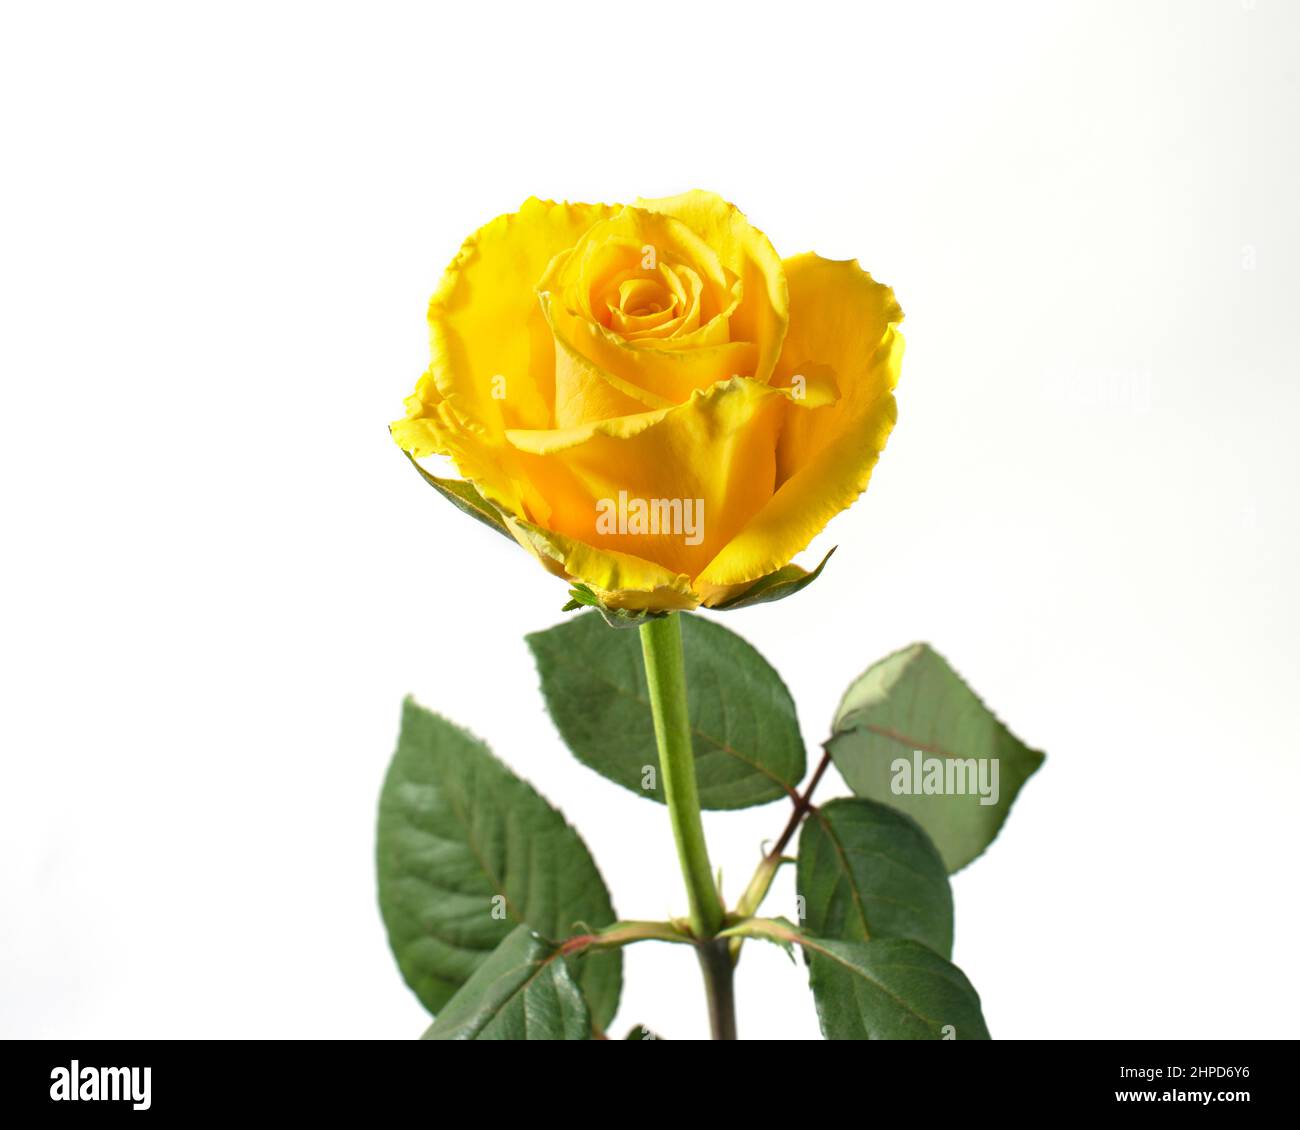 Yellow rose flover isolated on white background. Stock Photo